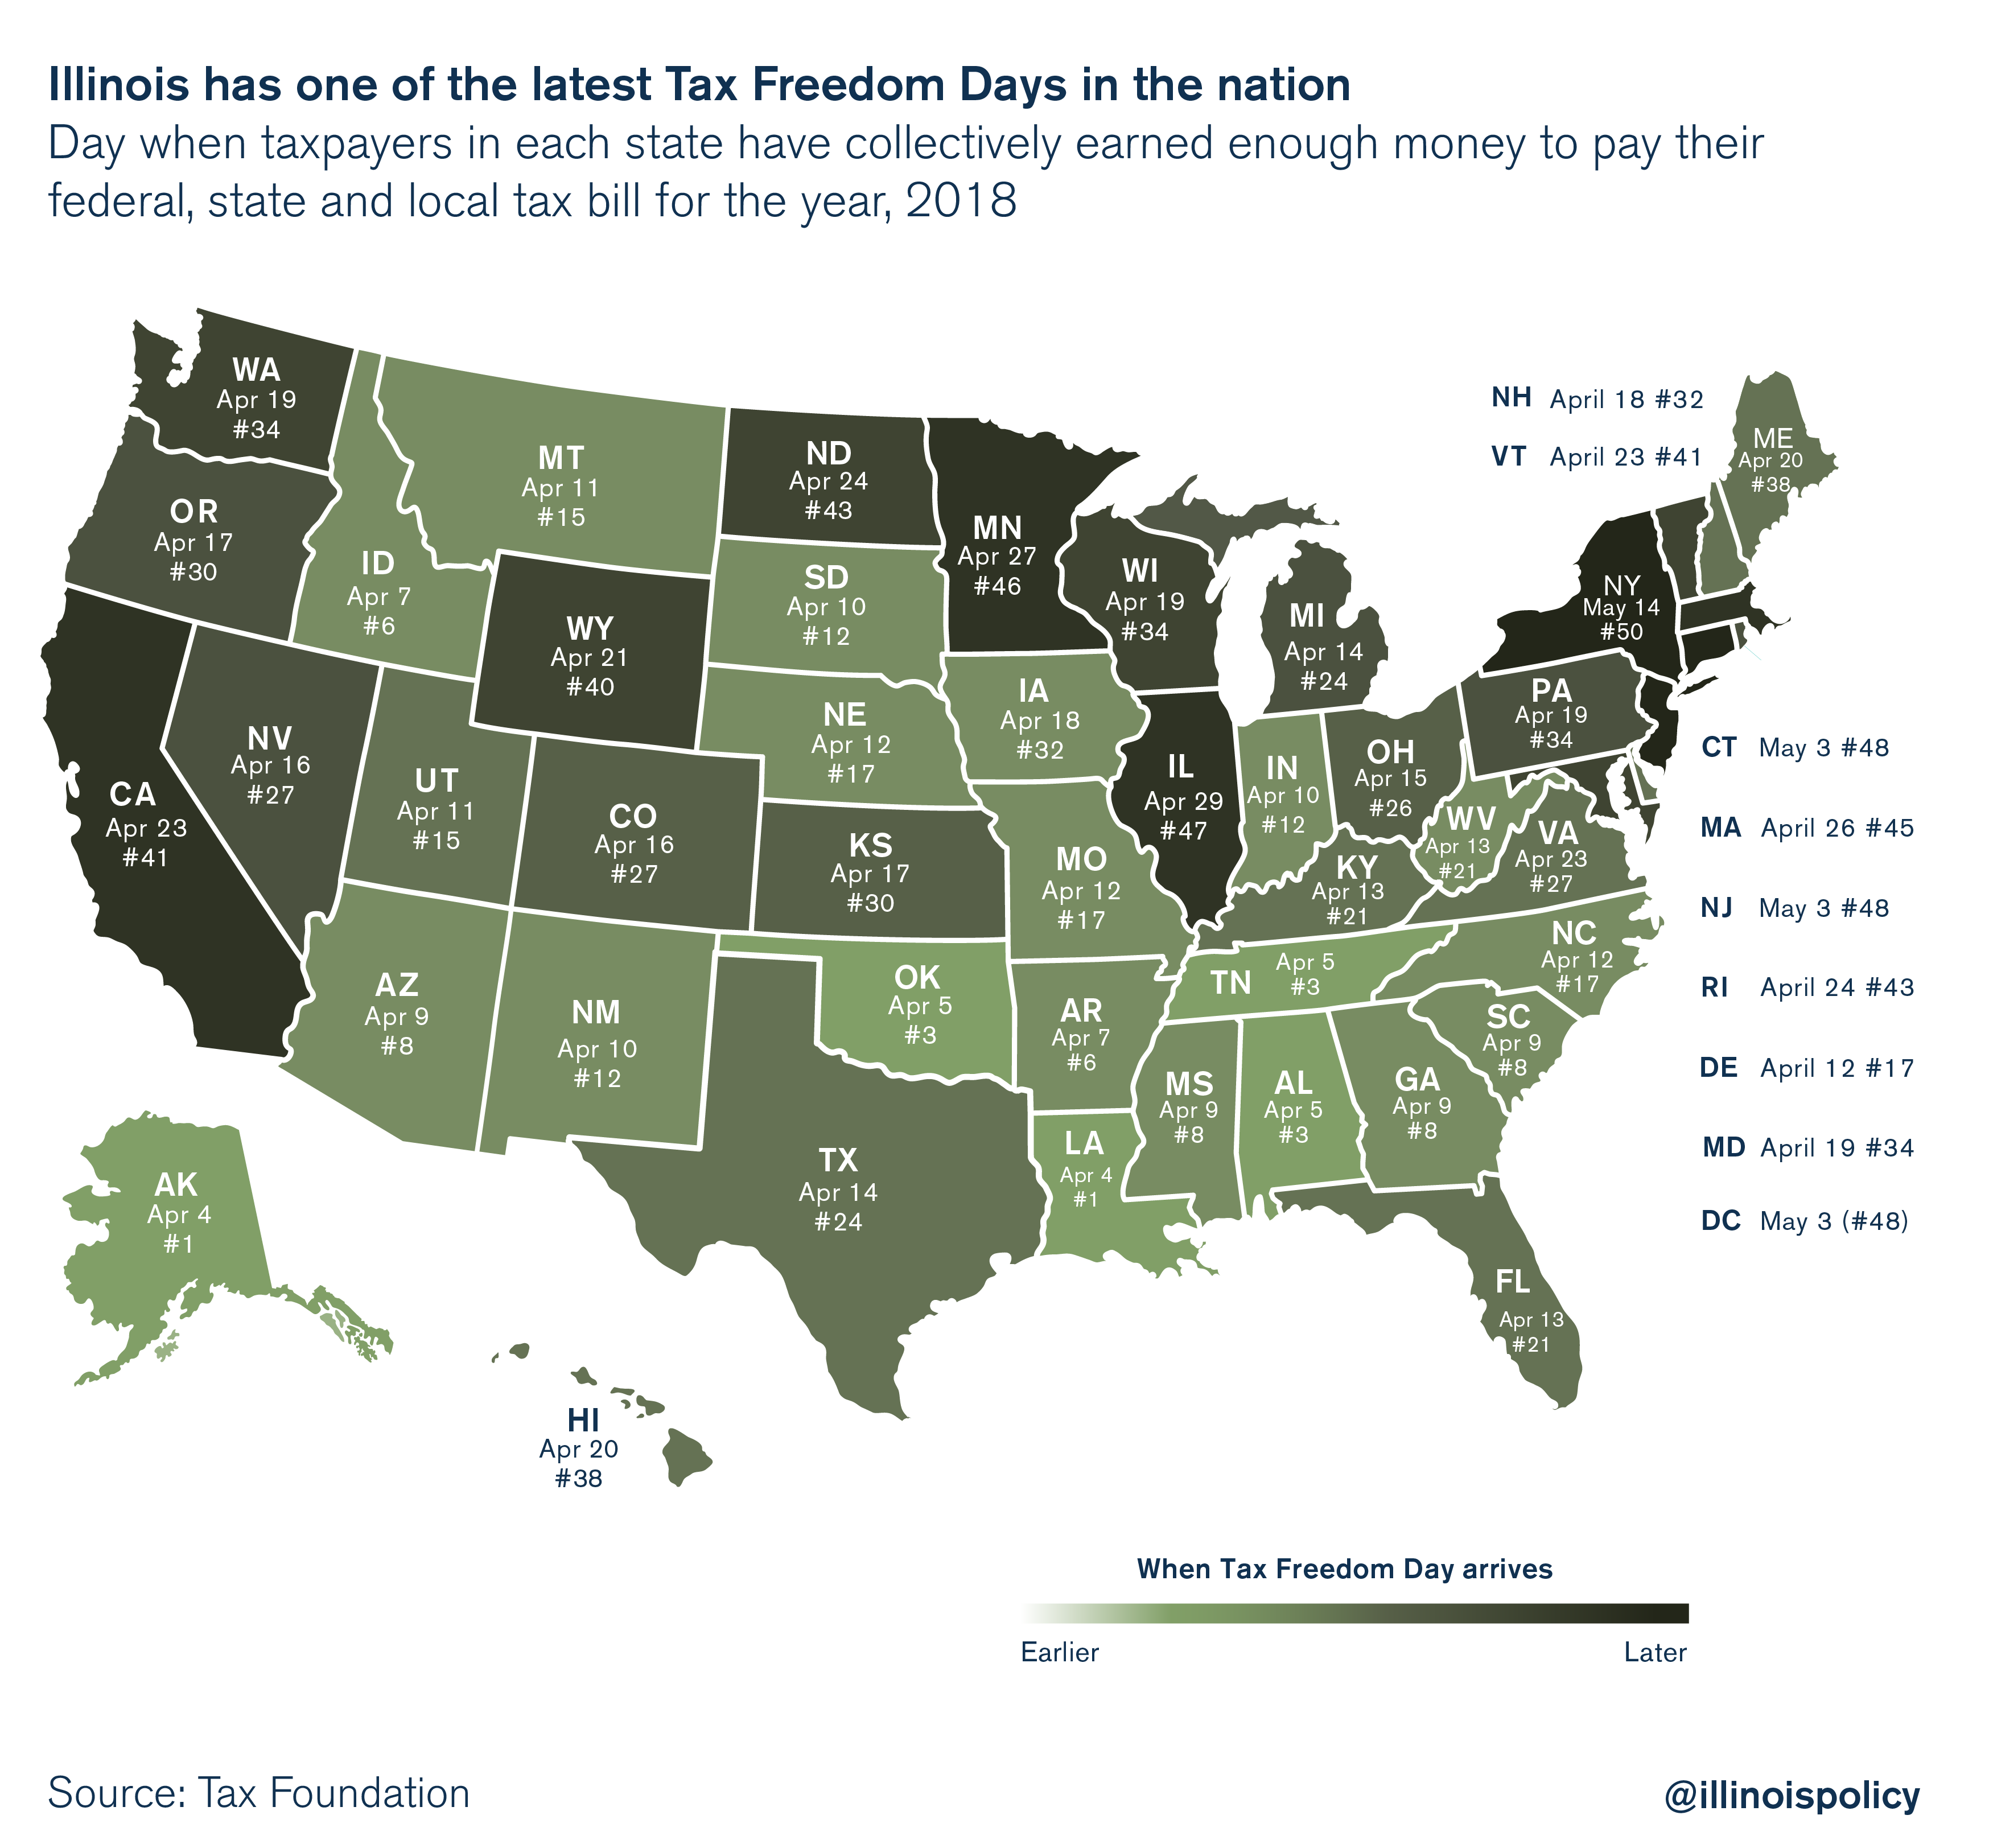 Illinois has one of the latest Tax Freedom Days in the nation